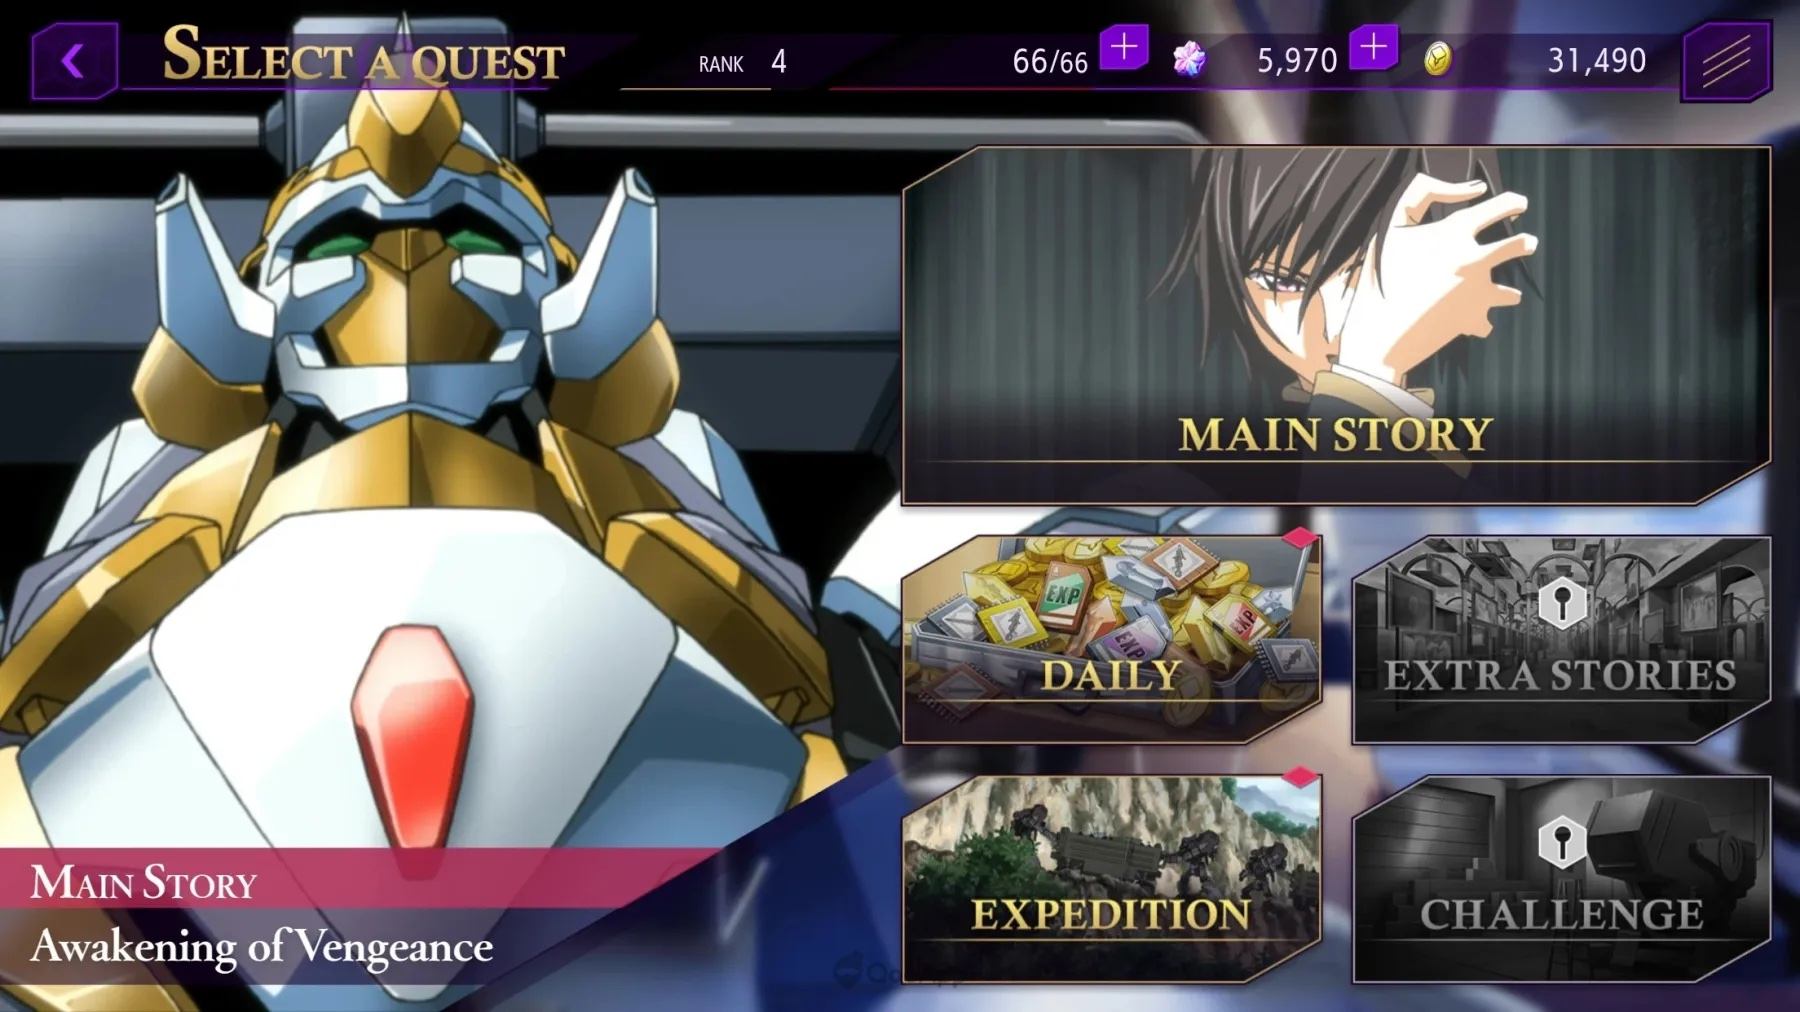 Code Geass: Lelouch of the Rebellion Lost Stories Release Date Confirmed on  May 17 - QooApp News